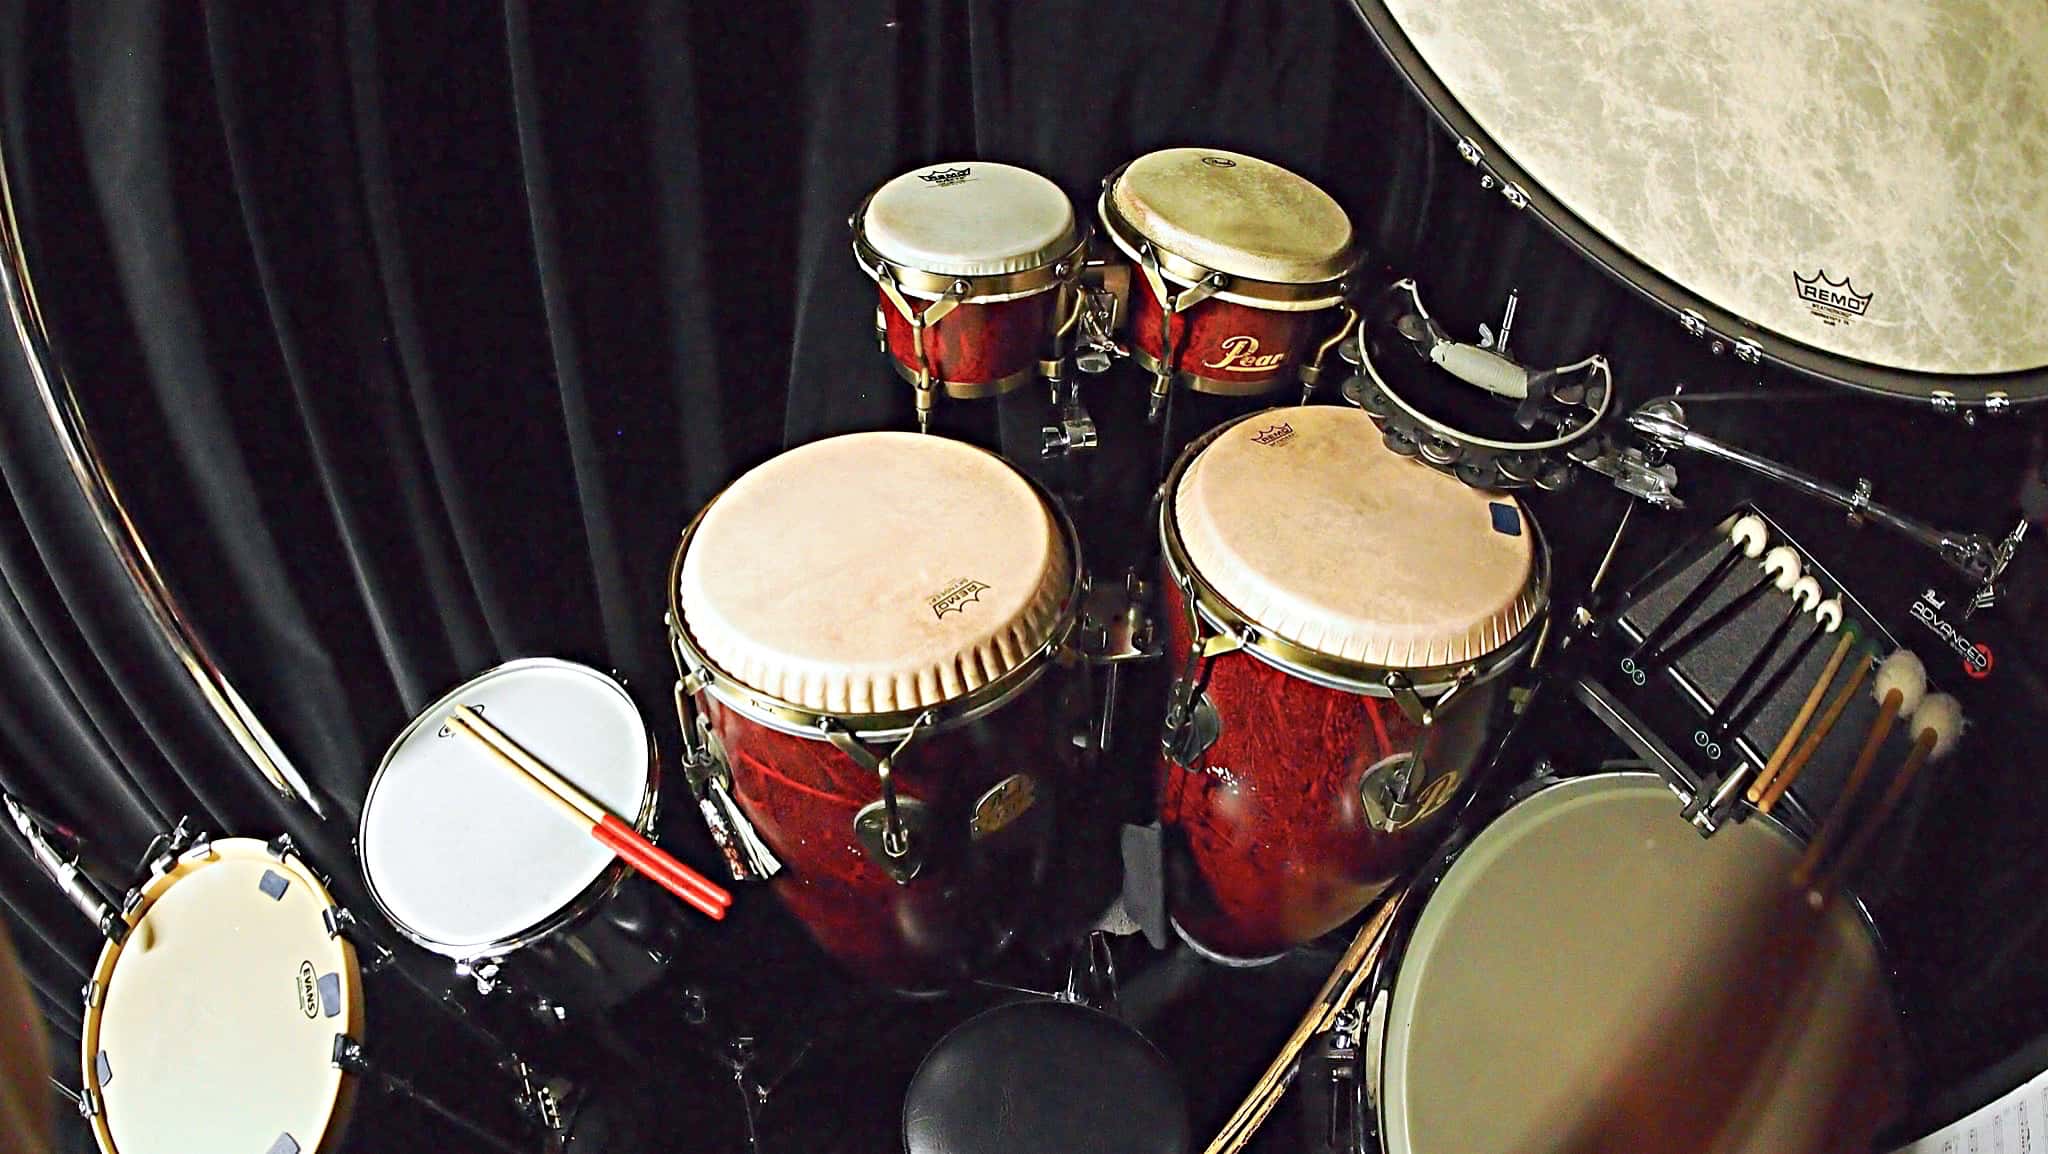 Sean Ritenauer's percussion setup for the Broadway production of Something Rotten at the St James Theatre.